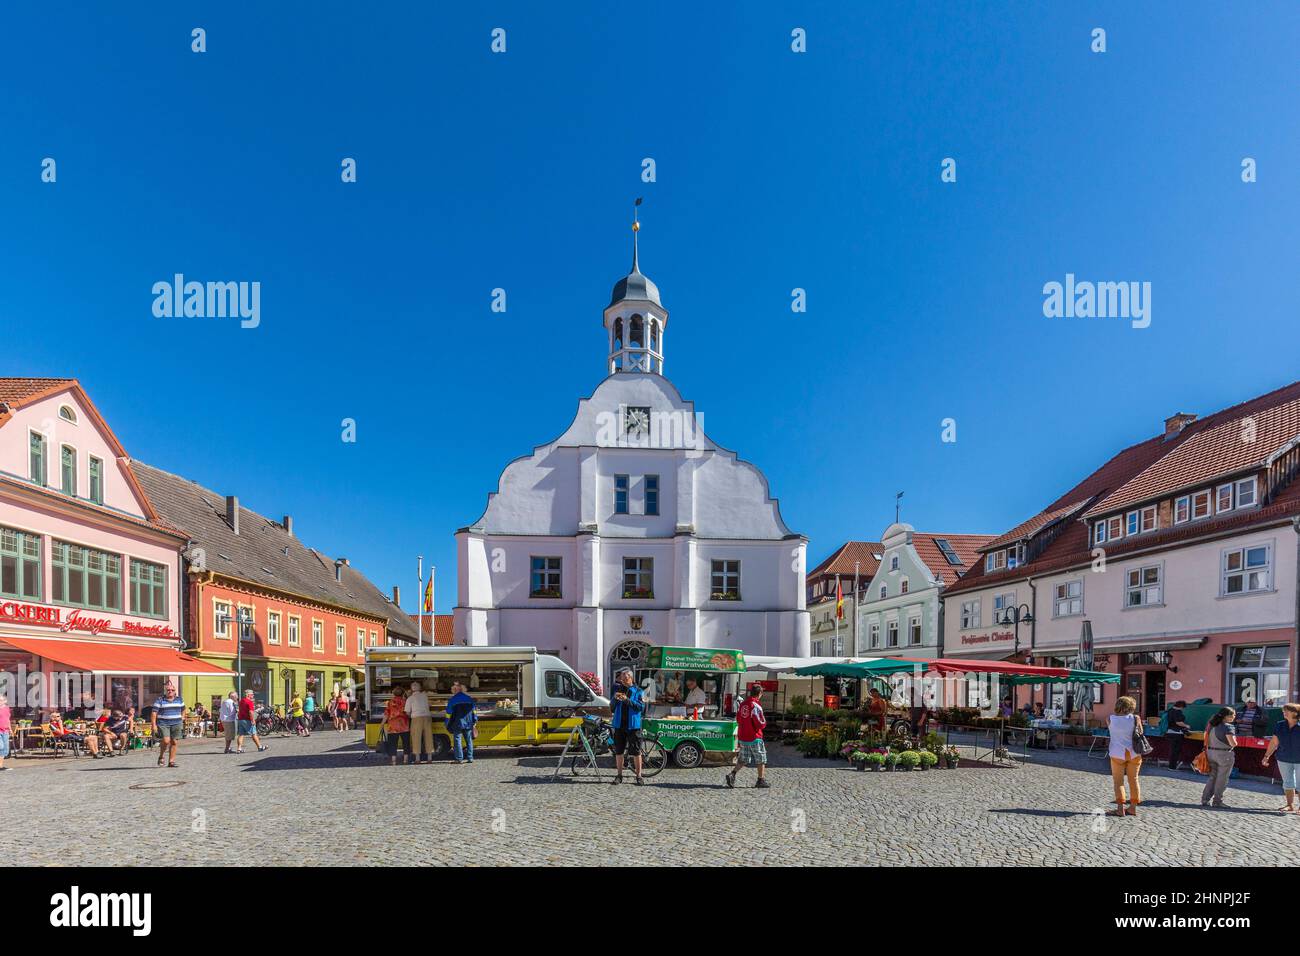 people enjoy gothic St Petri church in Wolgast under blue sky with historic market place Stock Photo